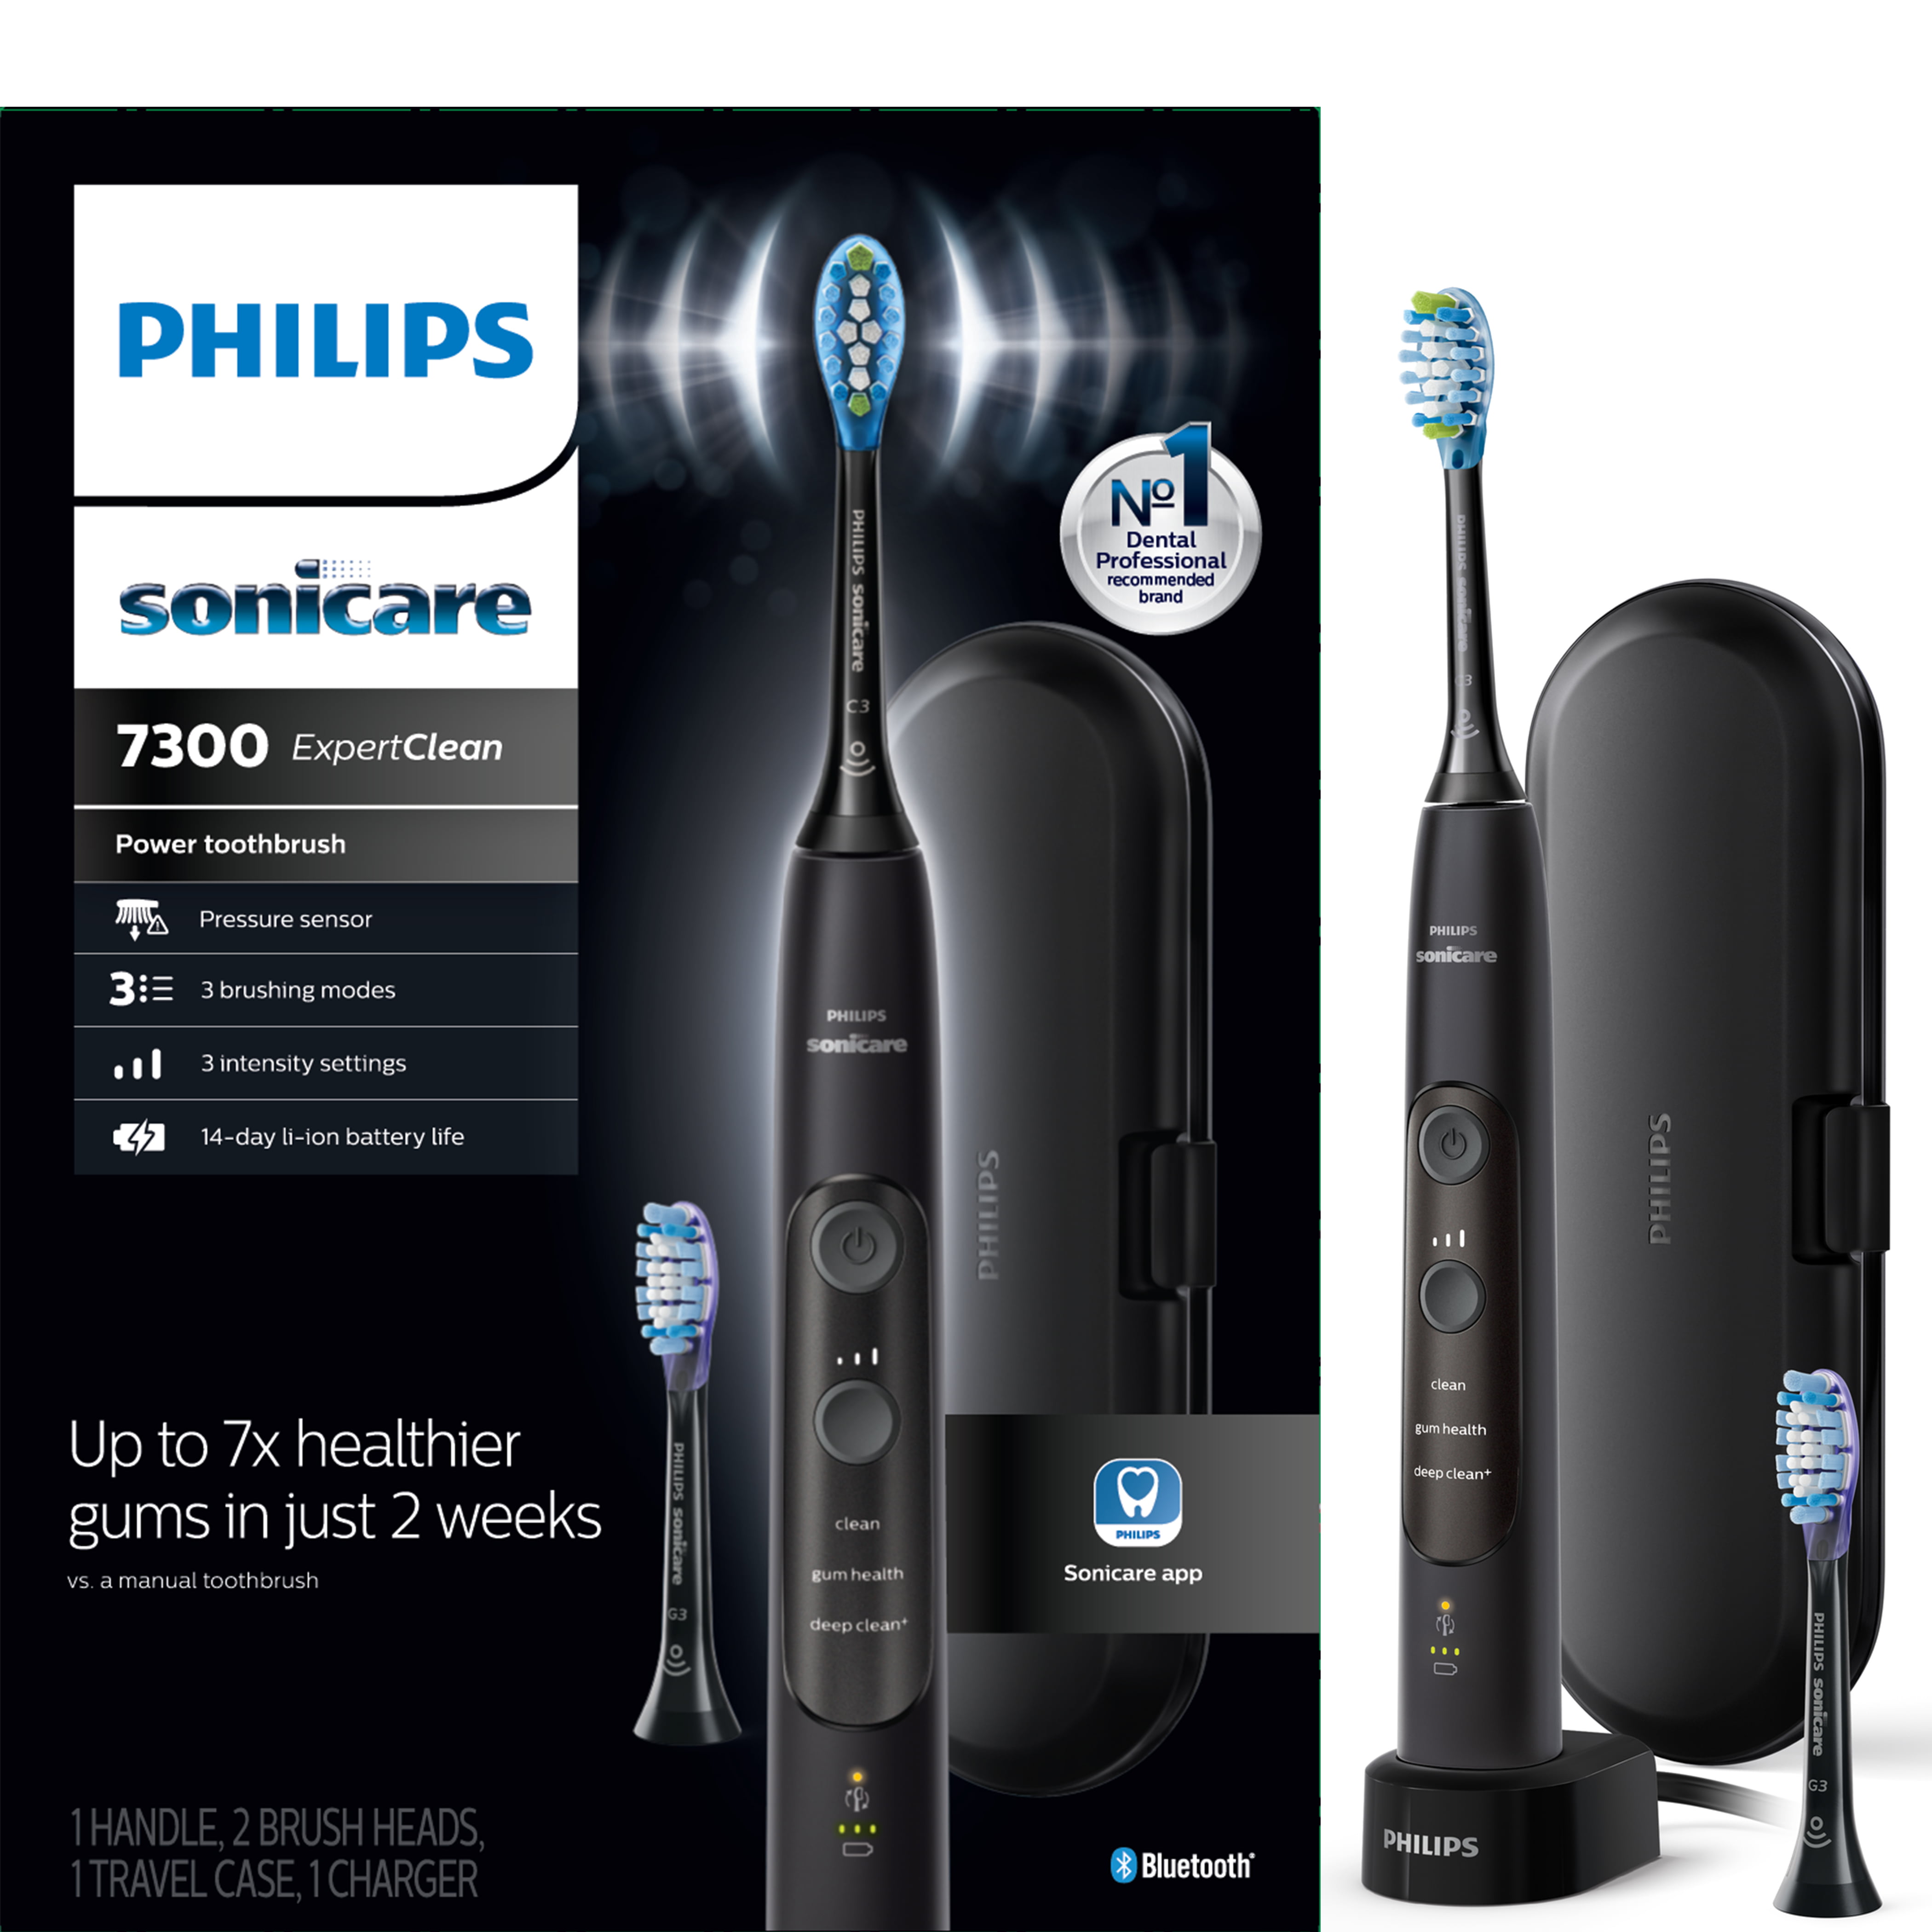 Philips sonicare expertclean 7300, rechargeable electric